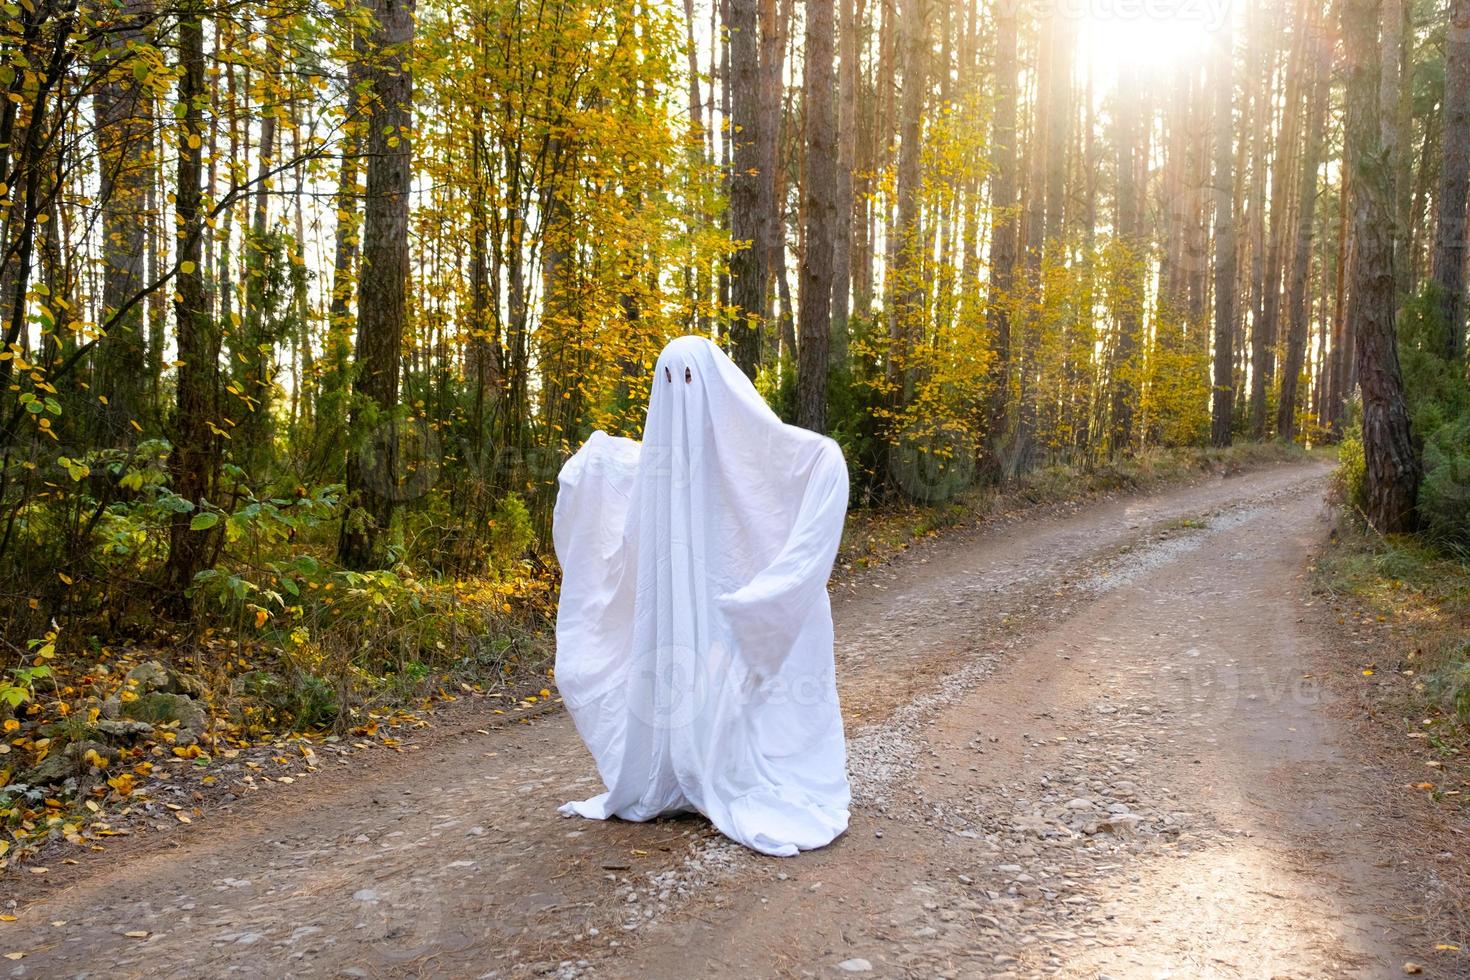 A child in sheets with cutout for eyes like a ghost costume in an autumn forest scares and terrifies. A kind little funny ghost. Halloween Party photo